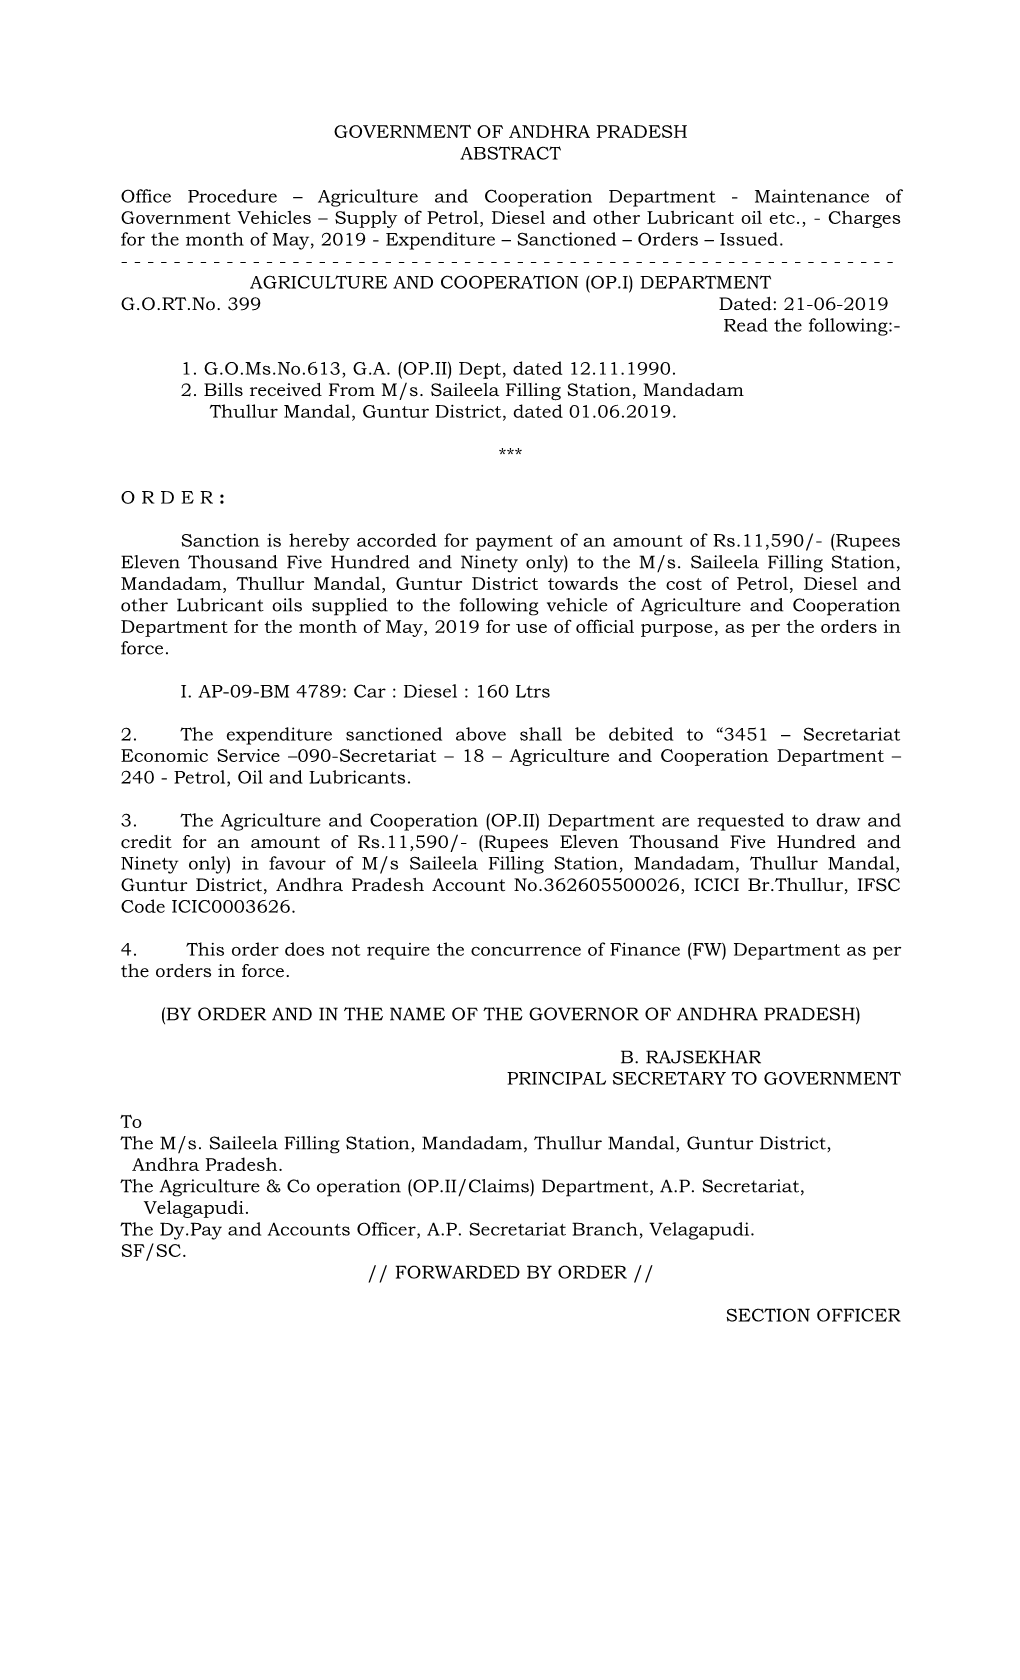 GOVERNMENT of ANDHRA PRADESH ABSTRACT Office